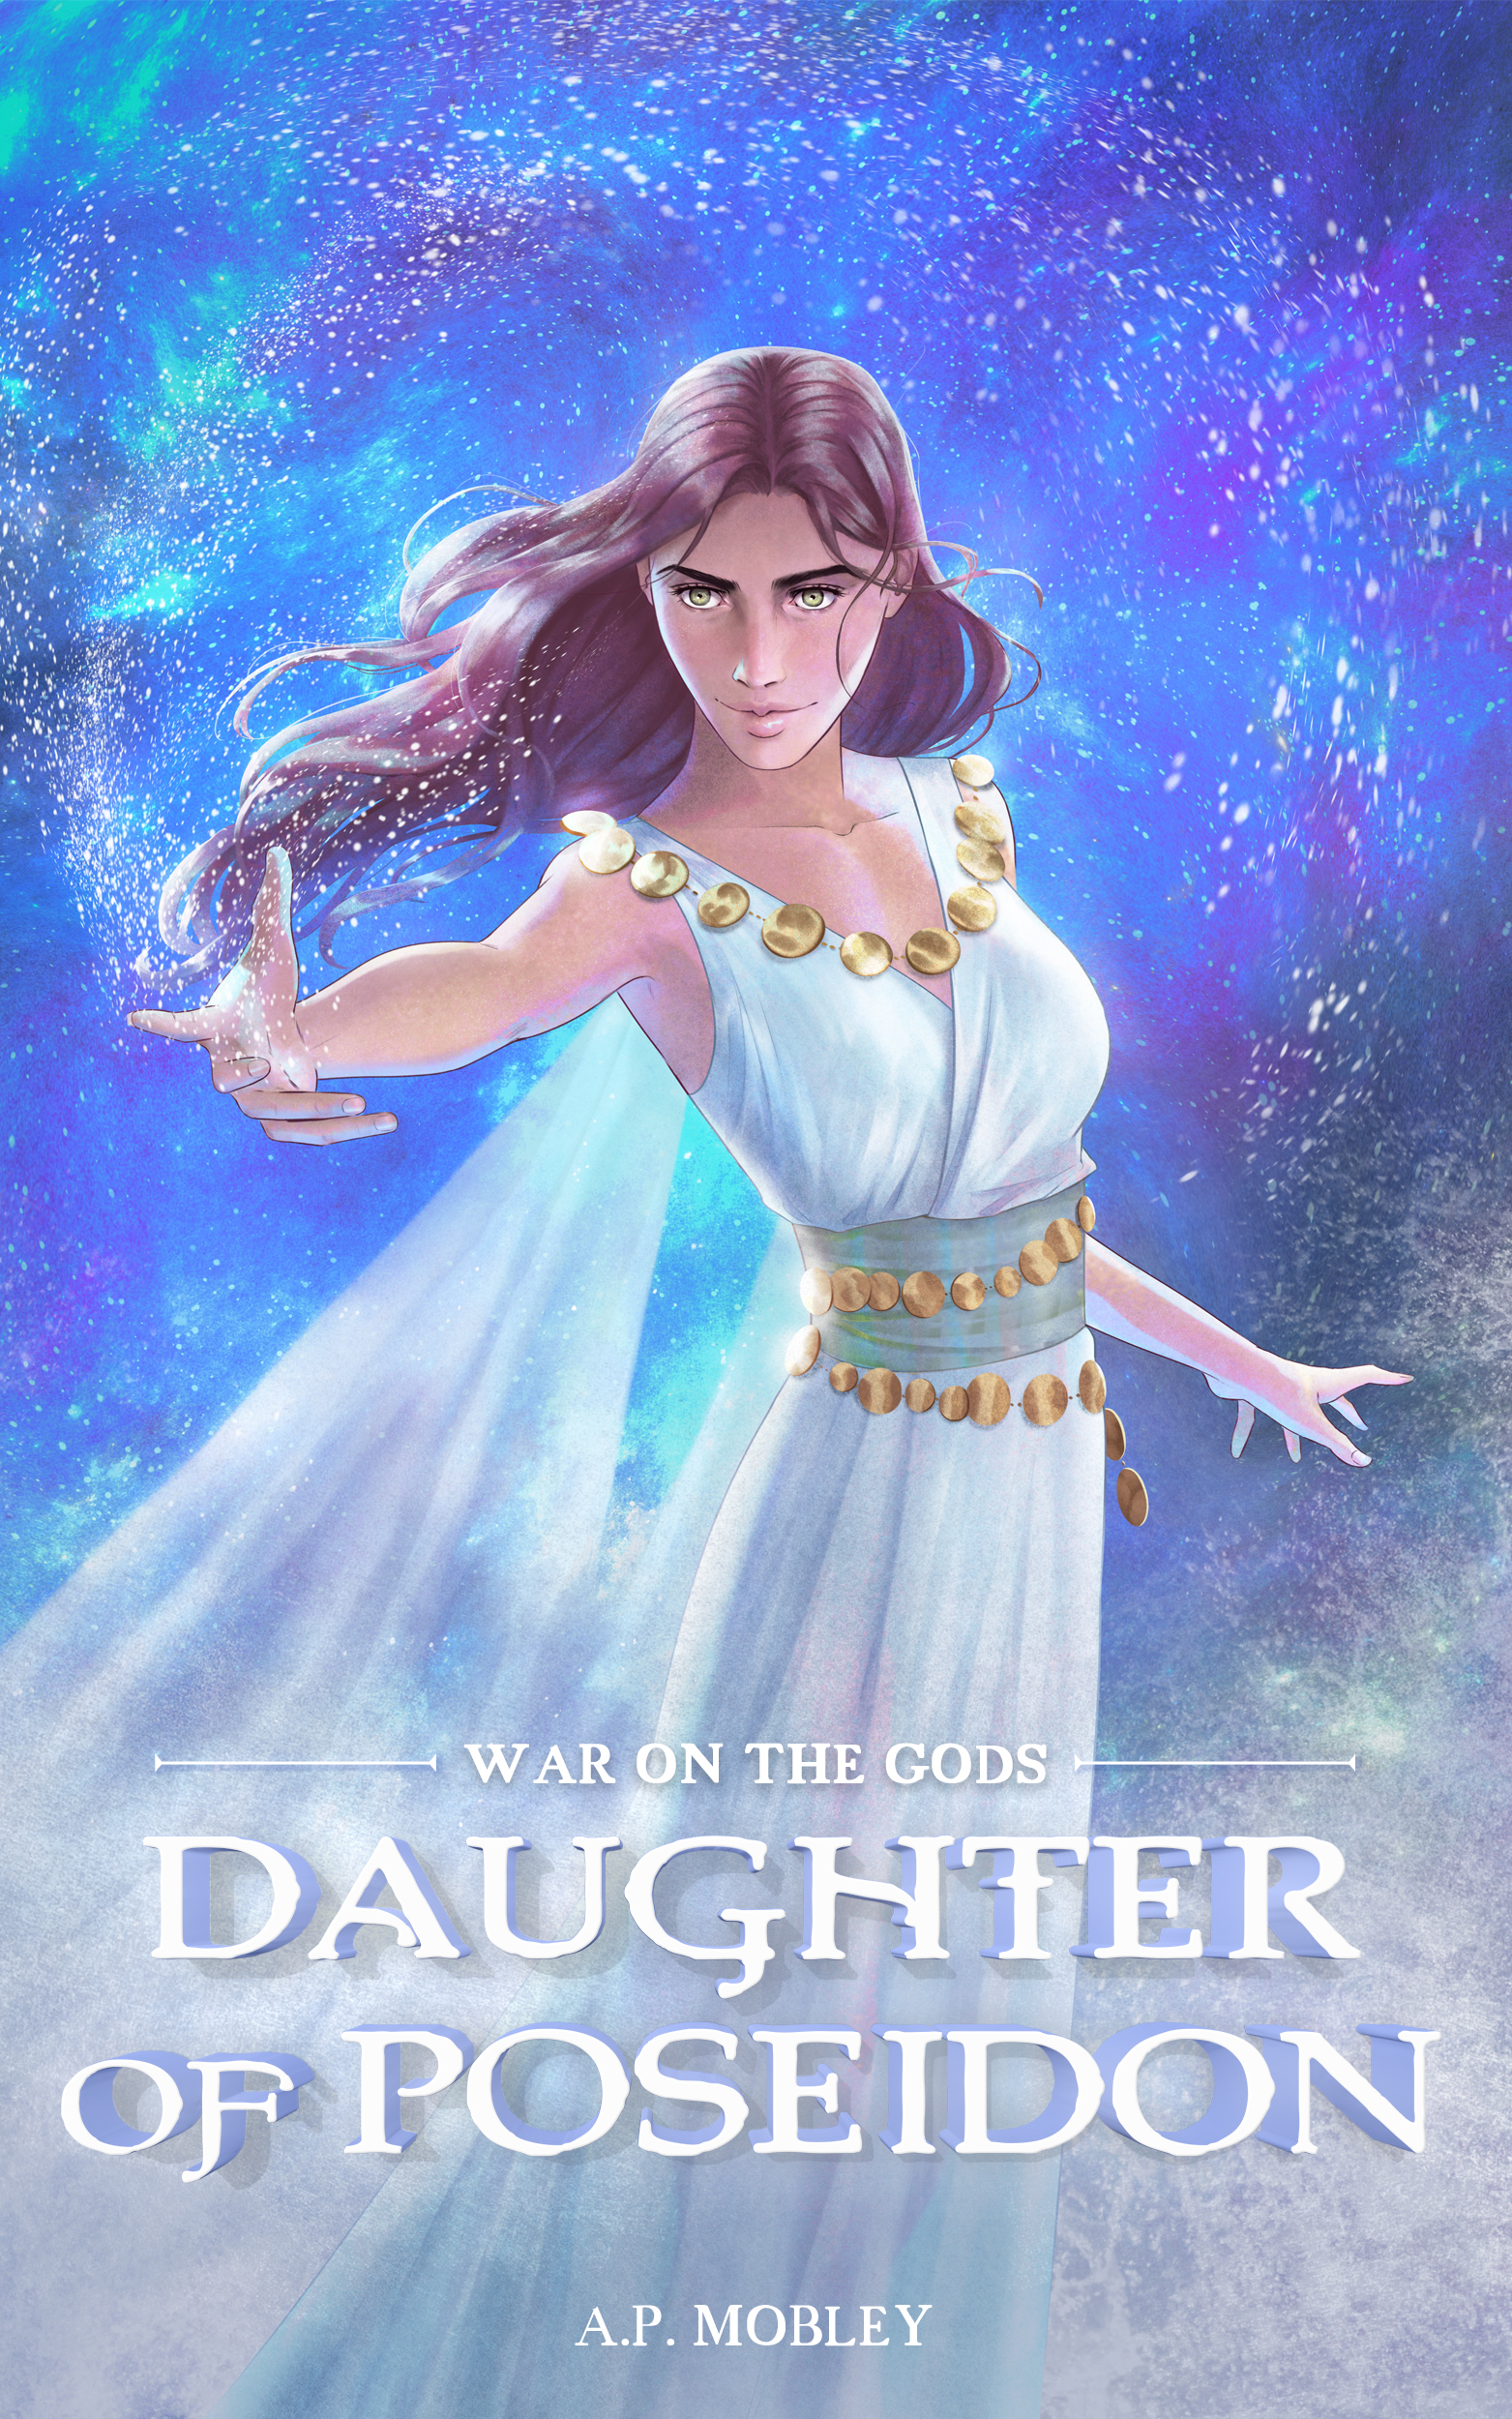 FREE: Daughter of Poseidon by A. P. Mobley